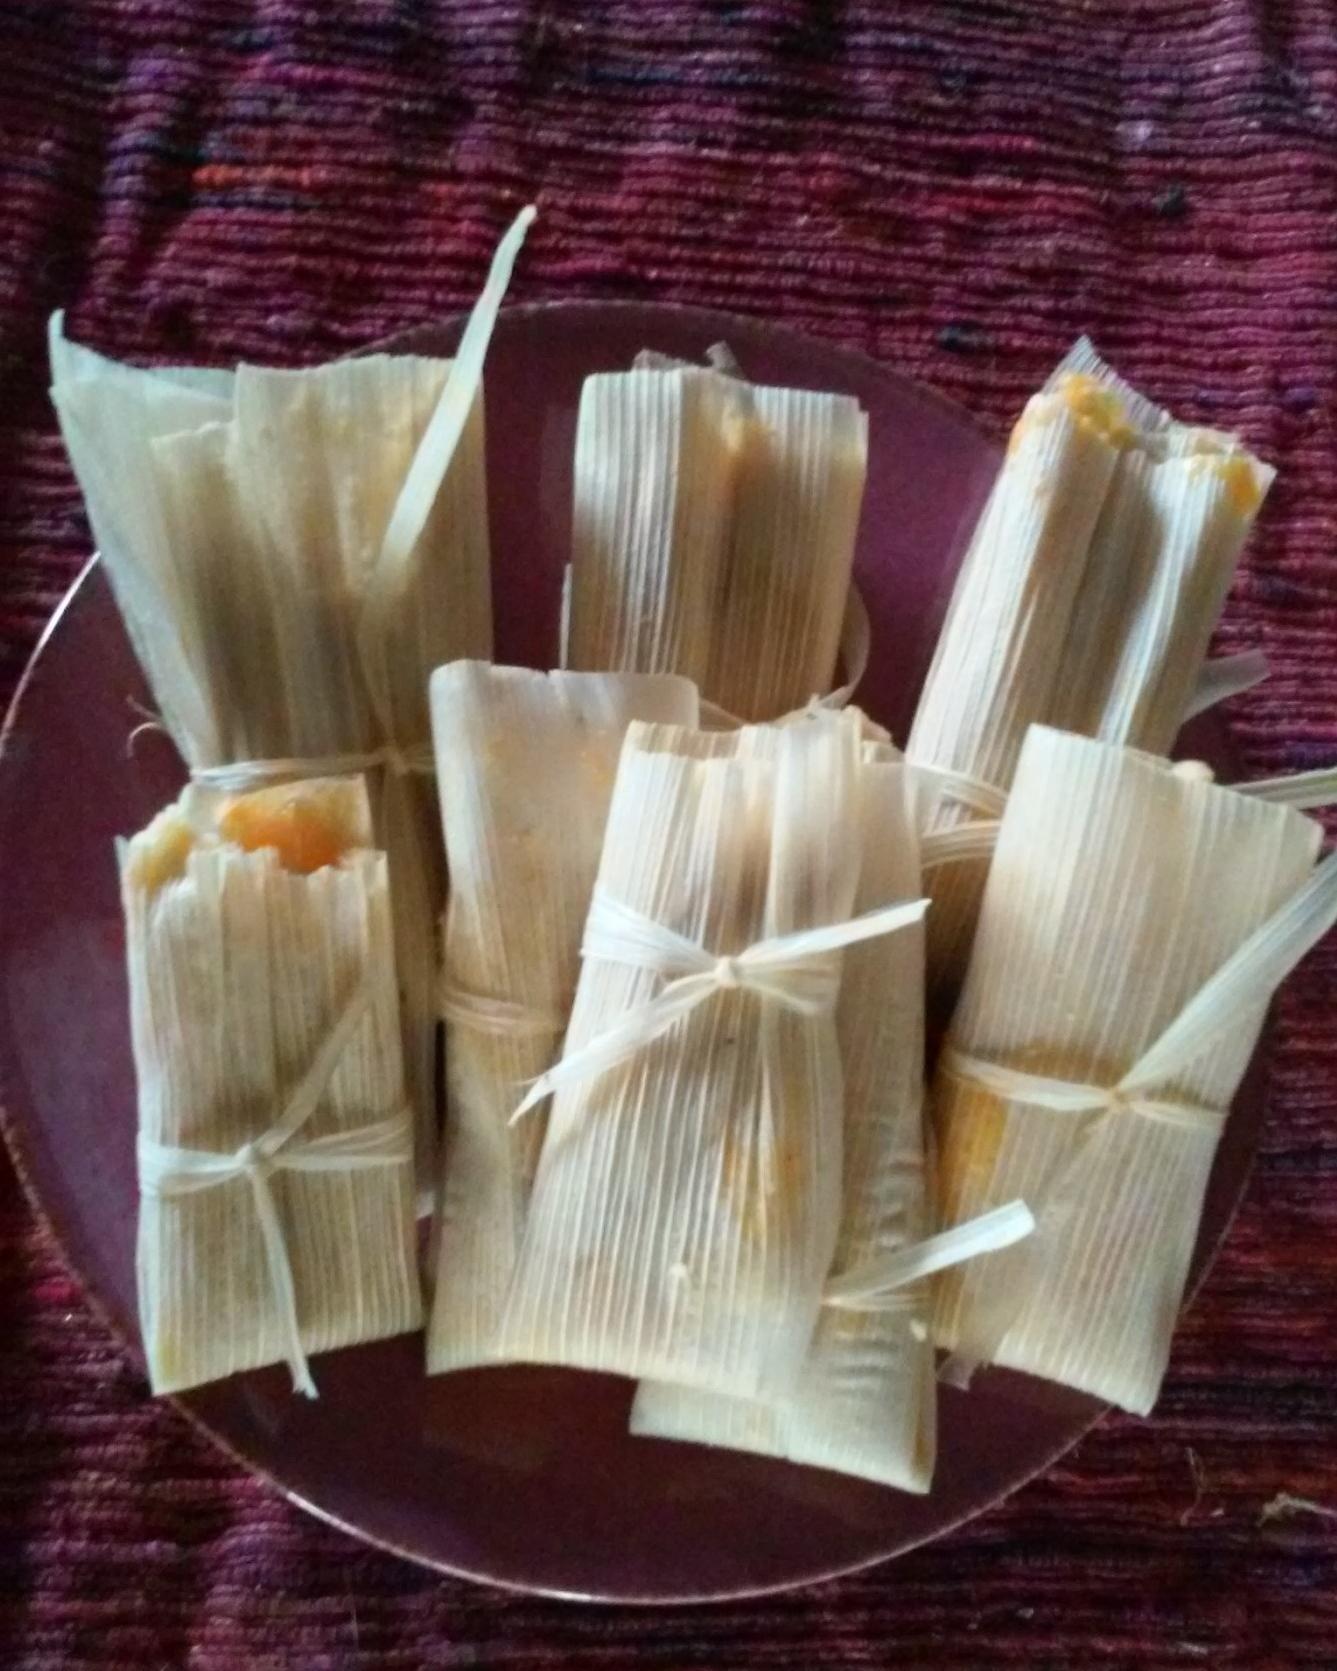  Steaming hot and delicious vegetarian tamales!